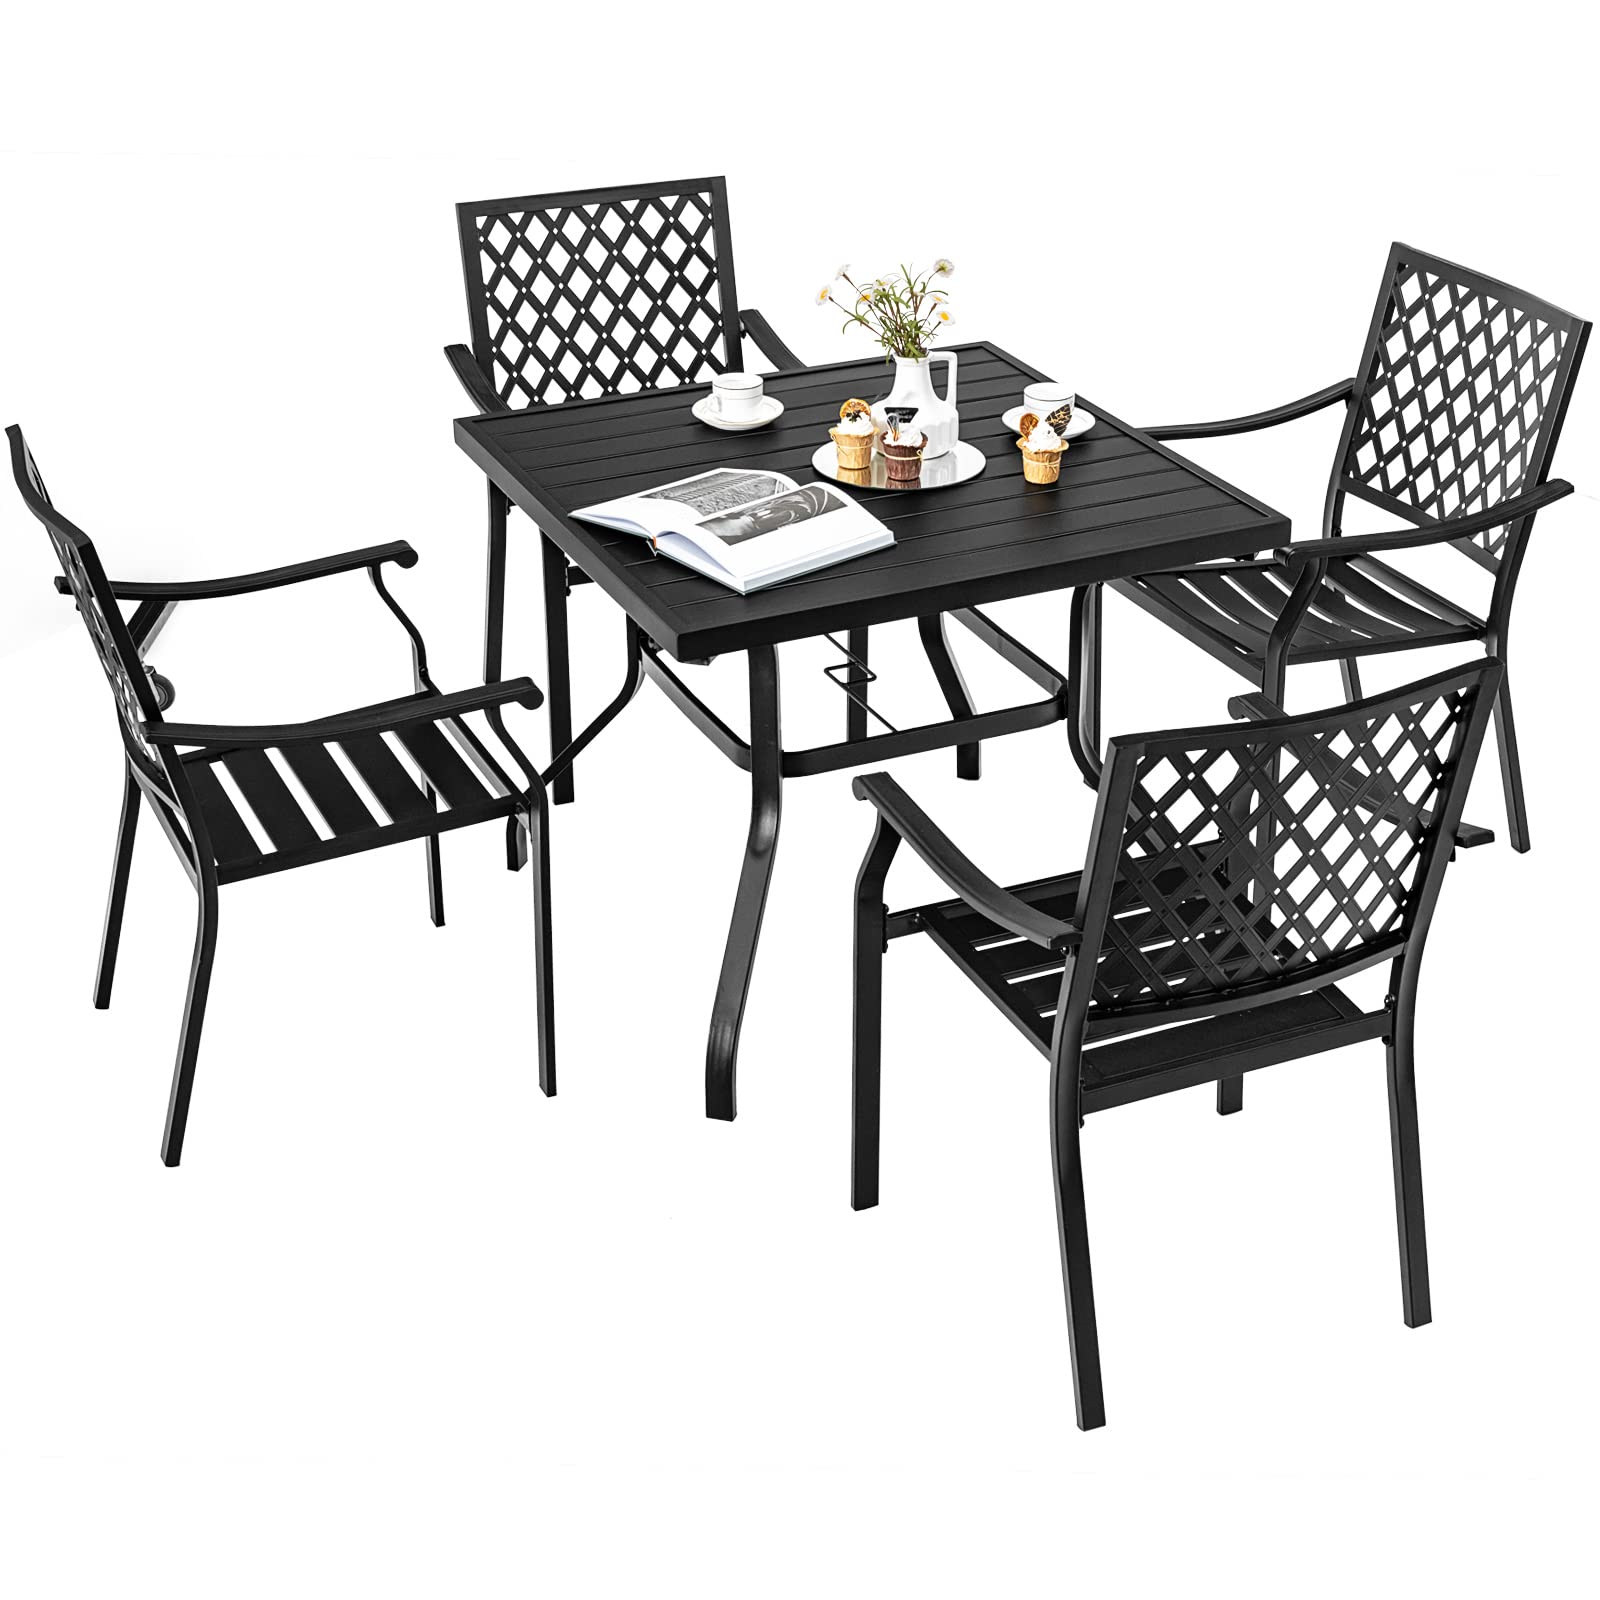 Giantex 5 Piece Patio Dining Set, Outdoor Dining Table W/ 4 Stackable Chairs